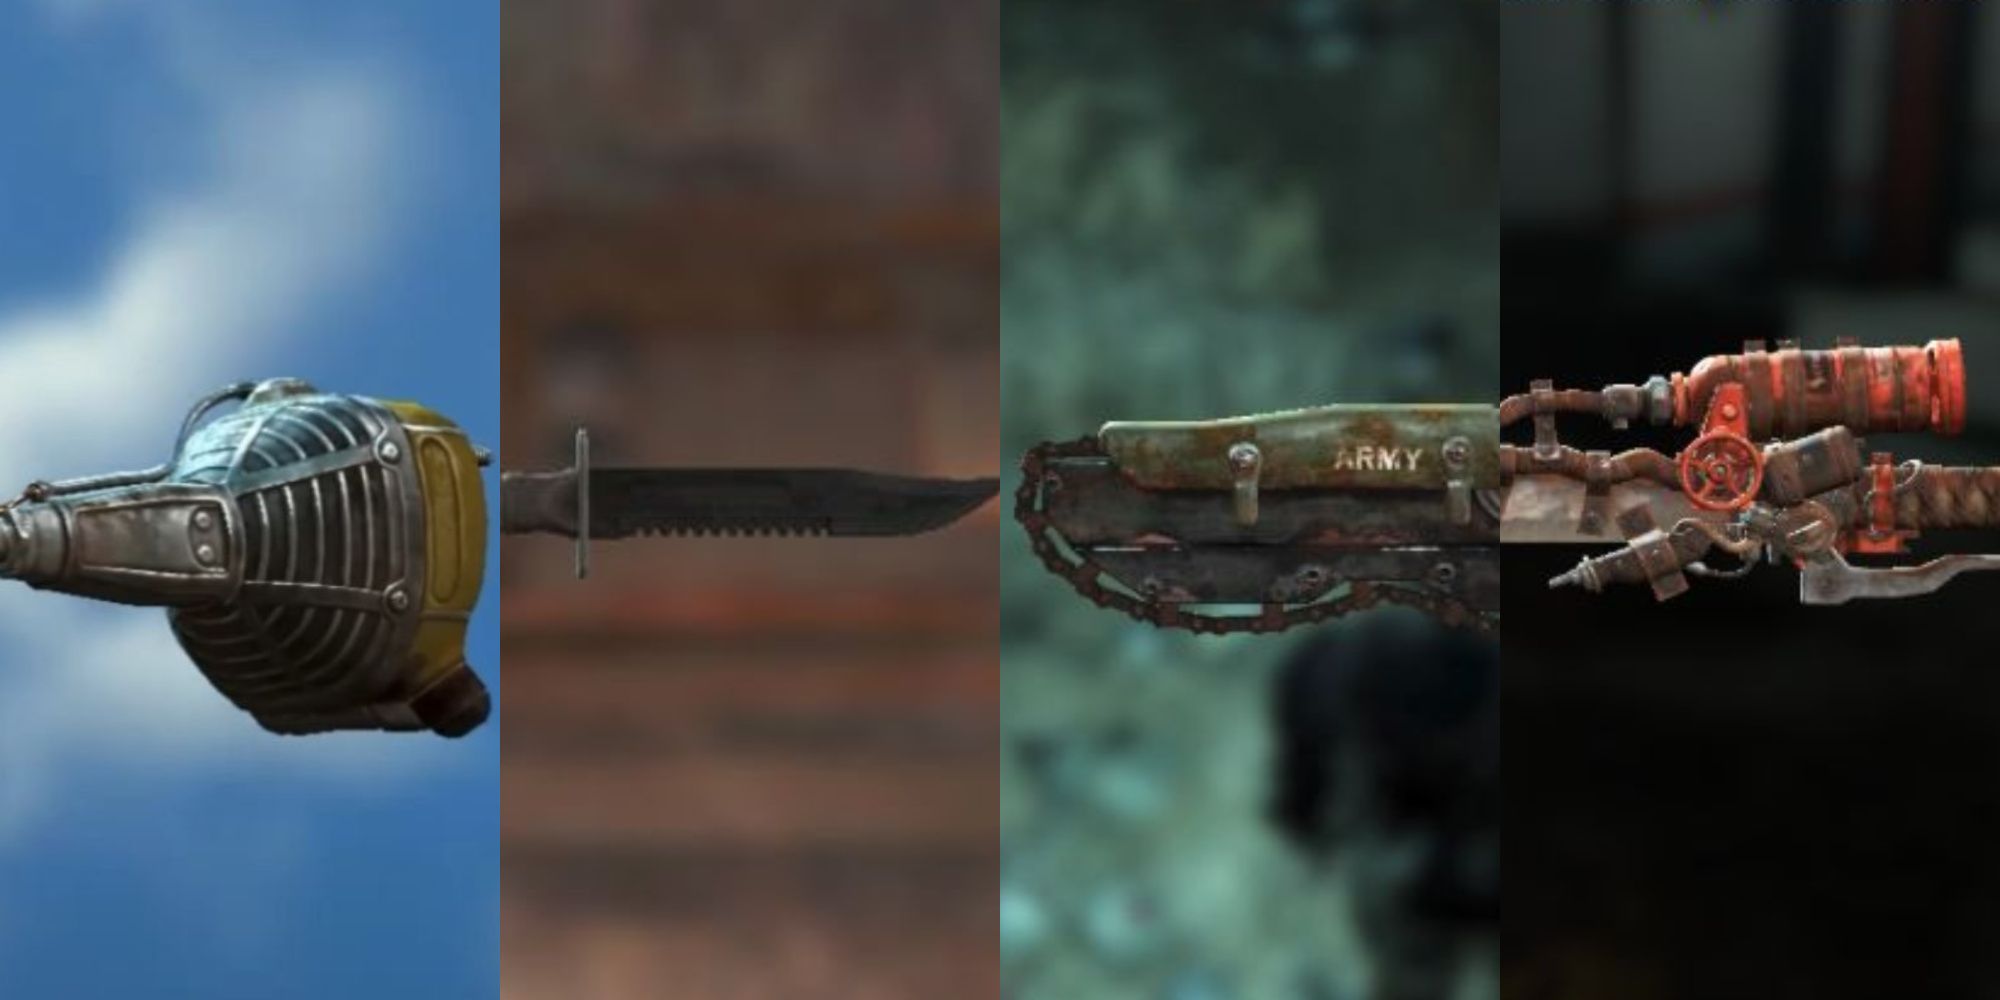 military melee weapons